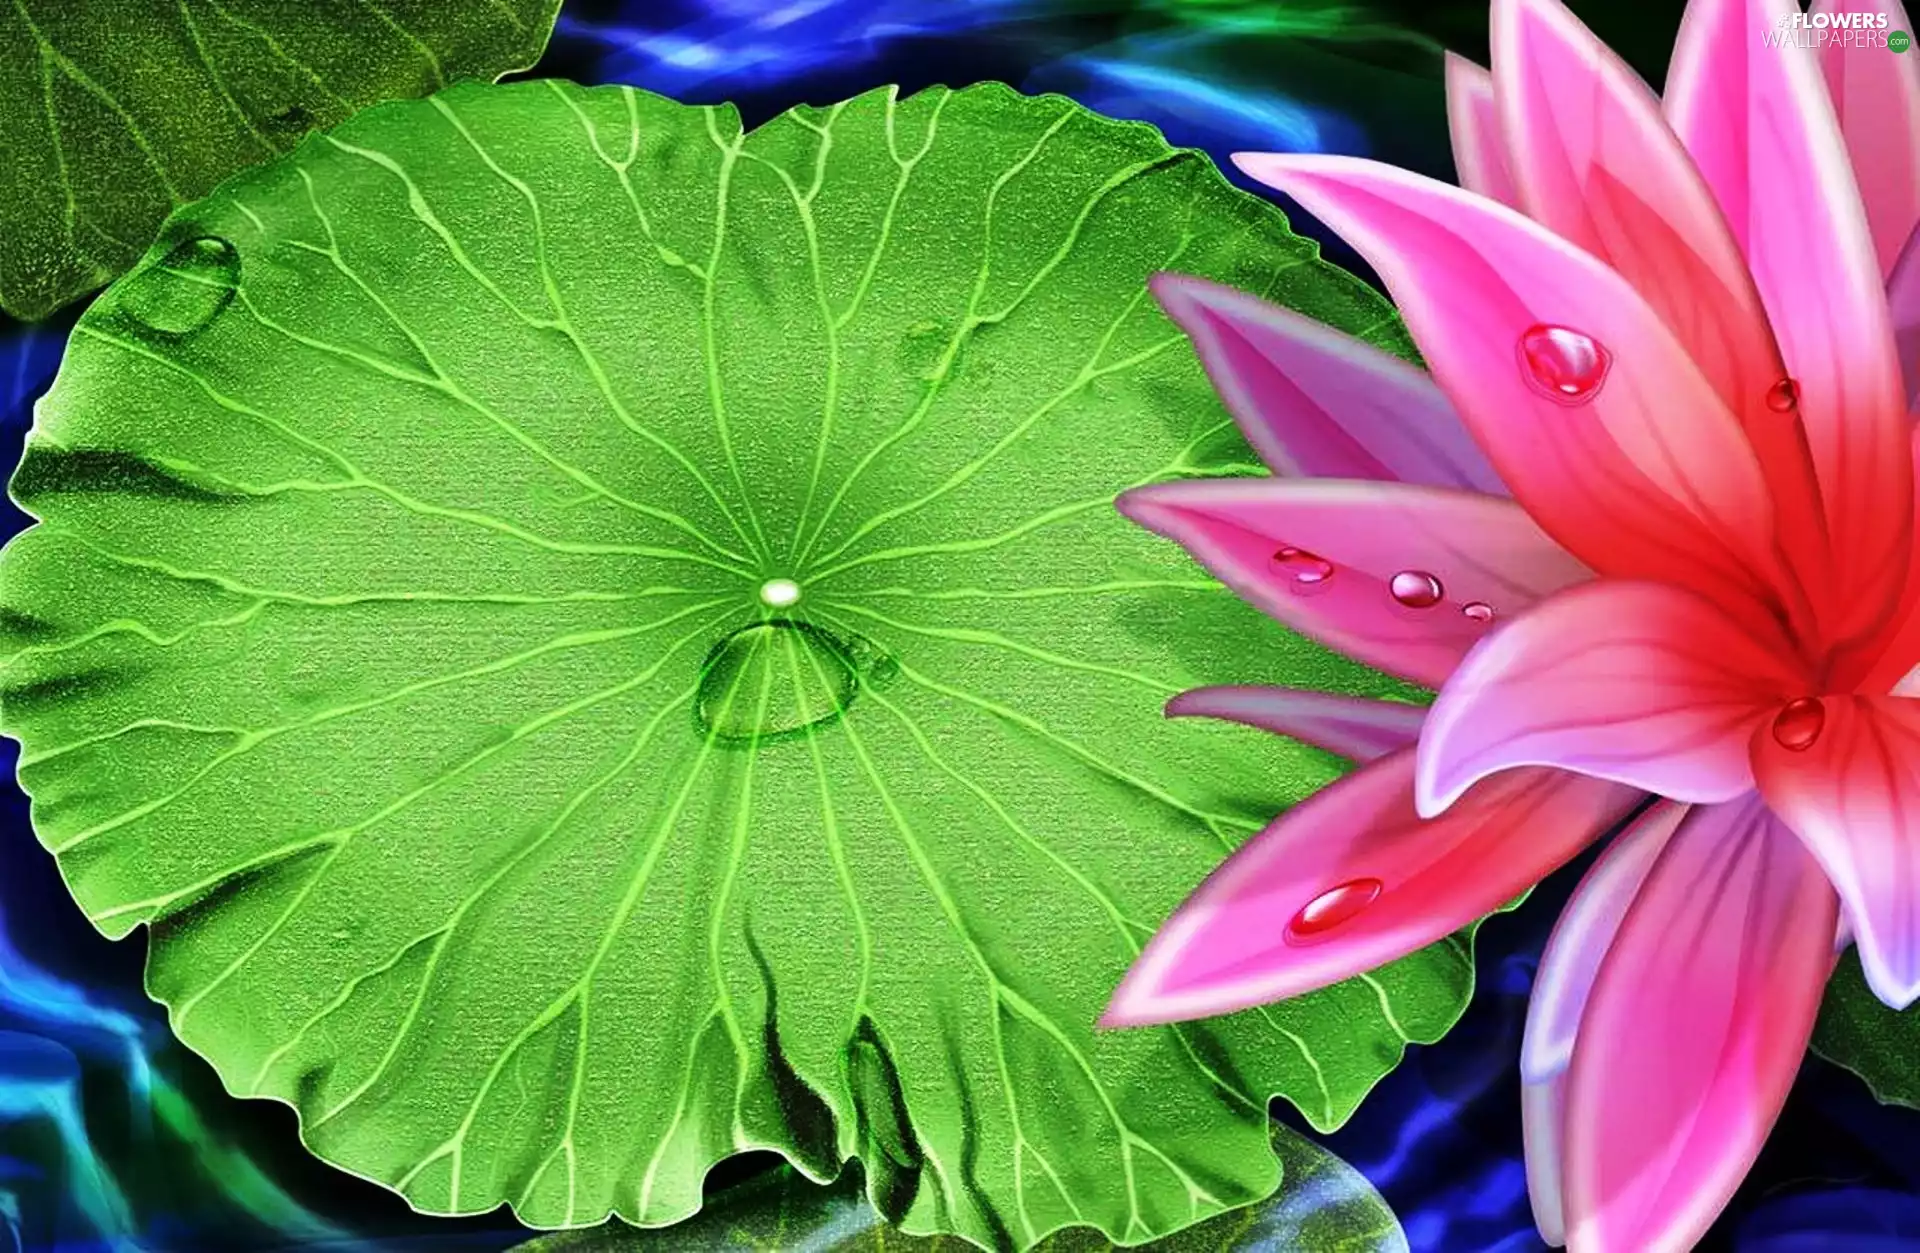 Lily, Leaf, graphics, green ones